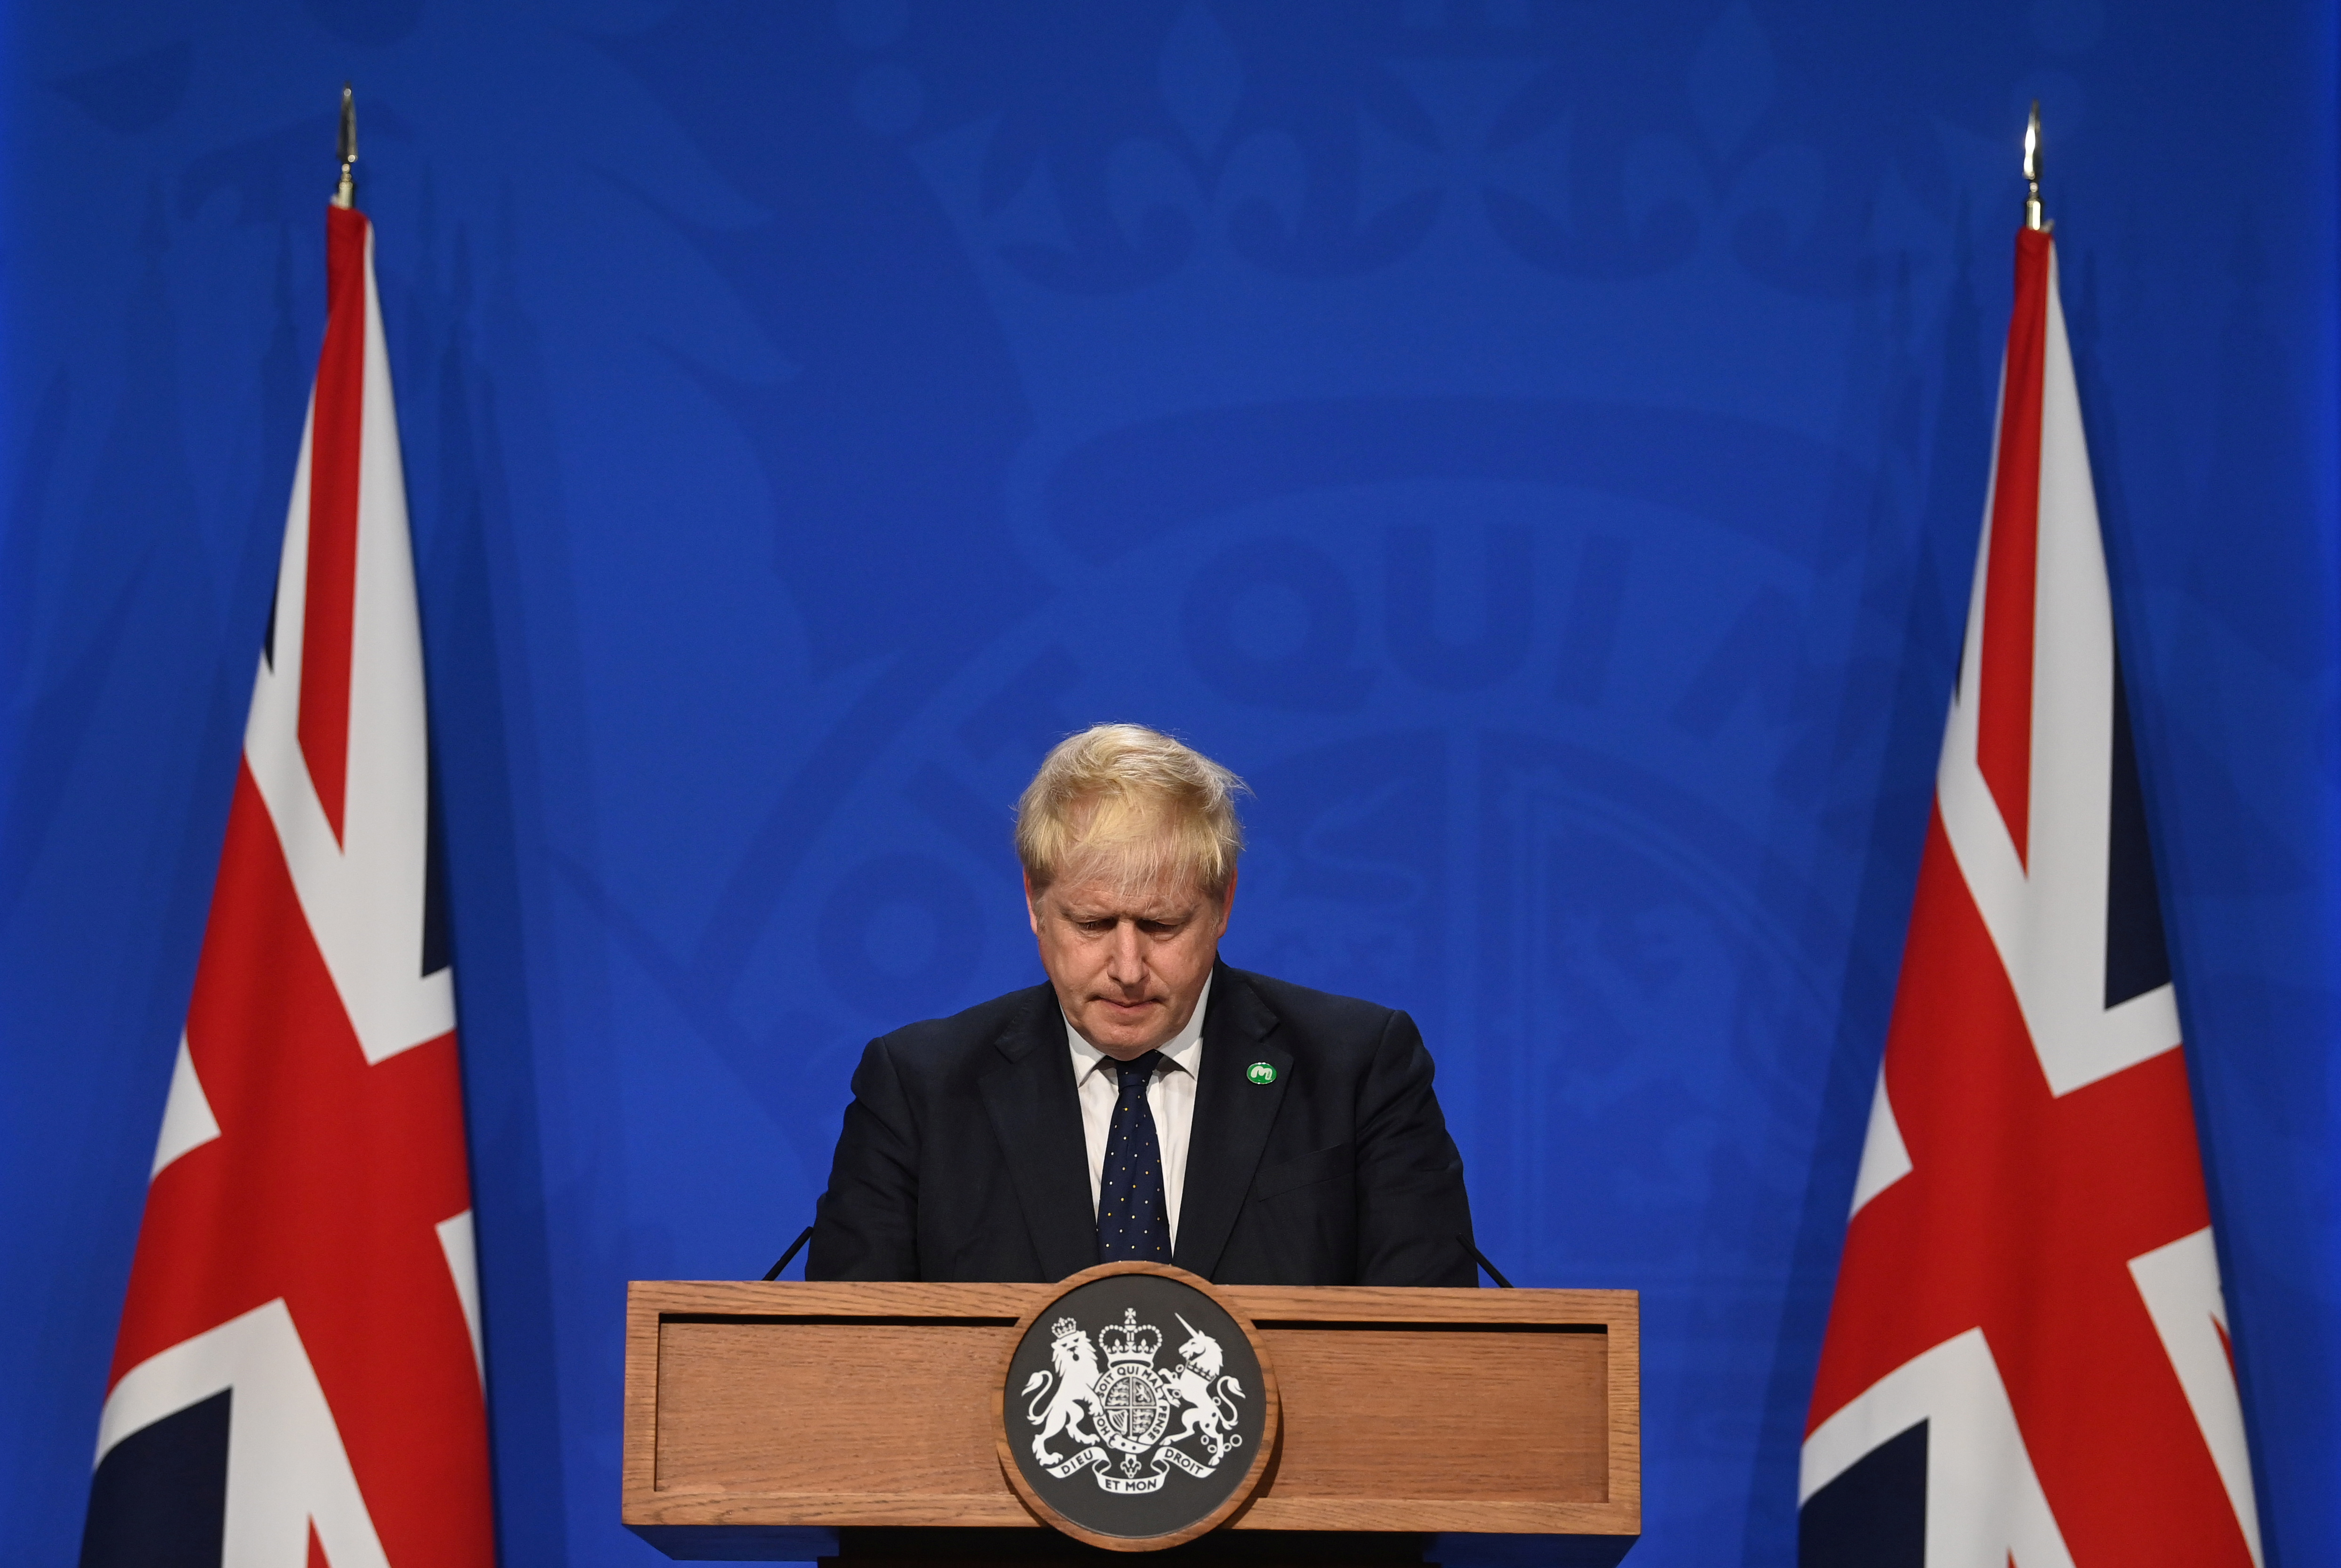 Britain's Prime Minister Johnson, Chancellor of the Exchequer Sunak and Health Secretary Javid give news conference in London